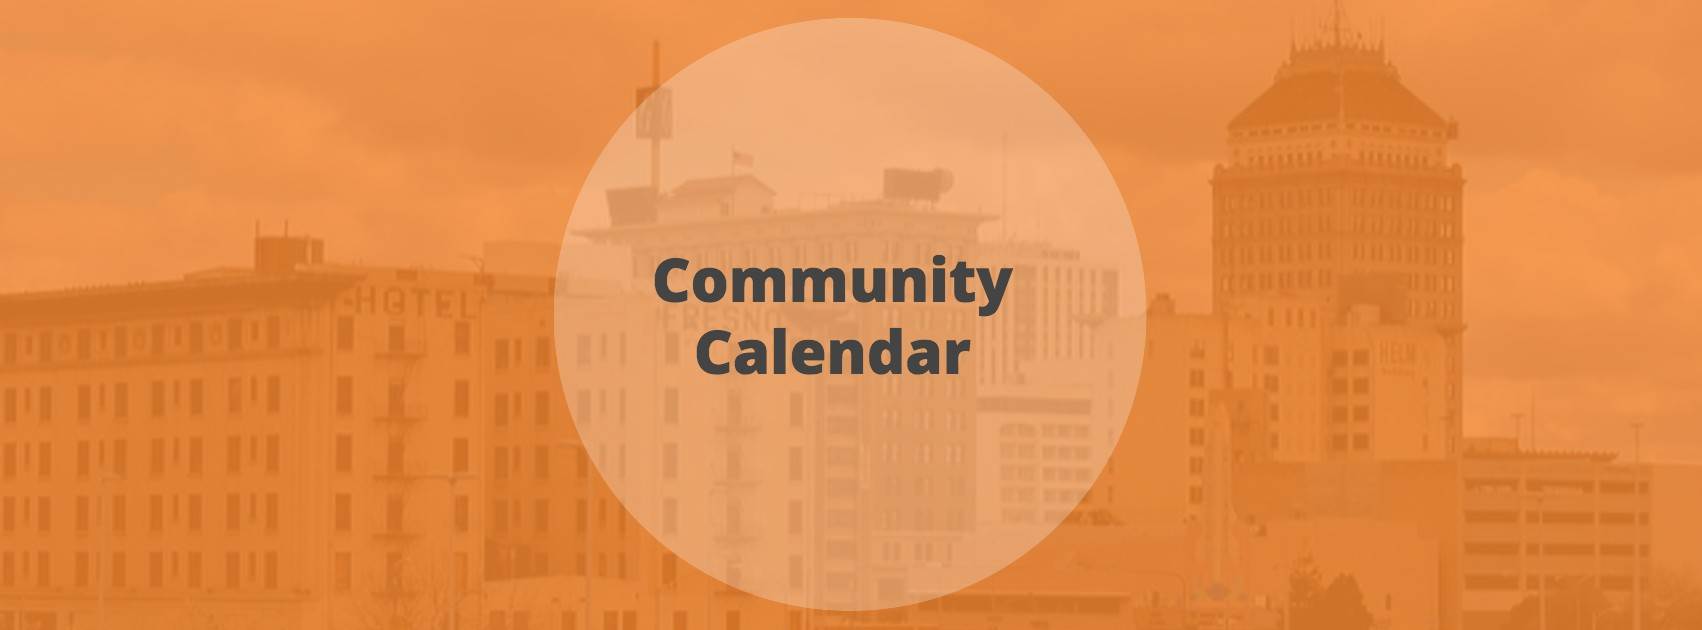  The community calendar is designed to help you find basic information about local adoption, foster care &amp; orphan care related events, all in one place!